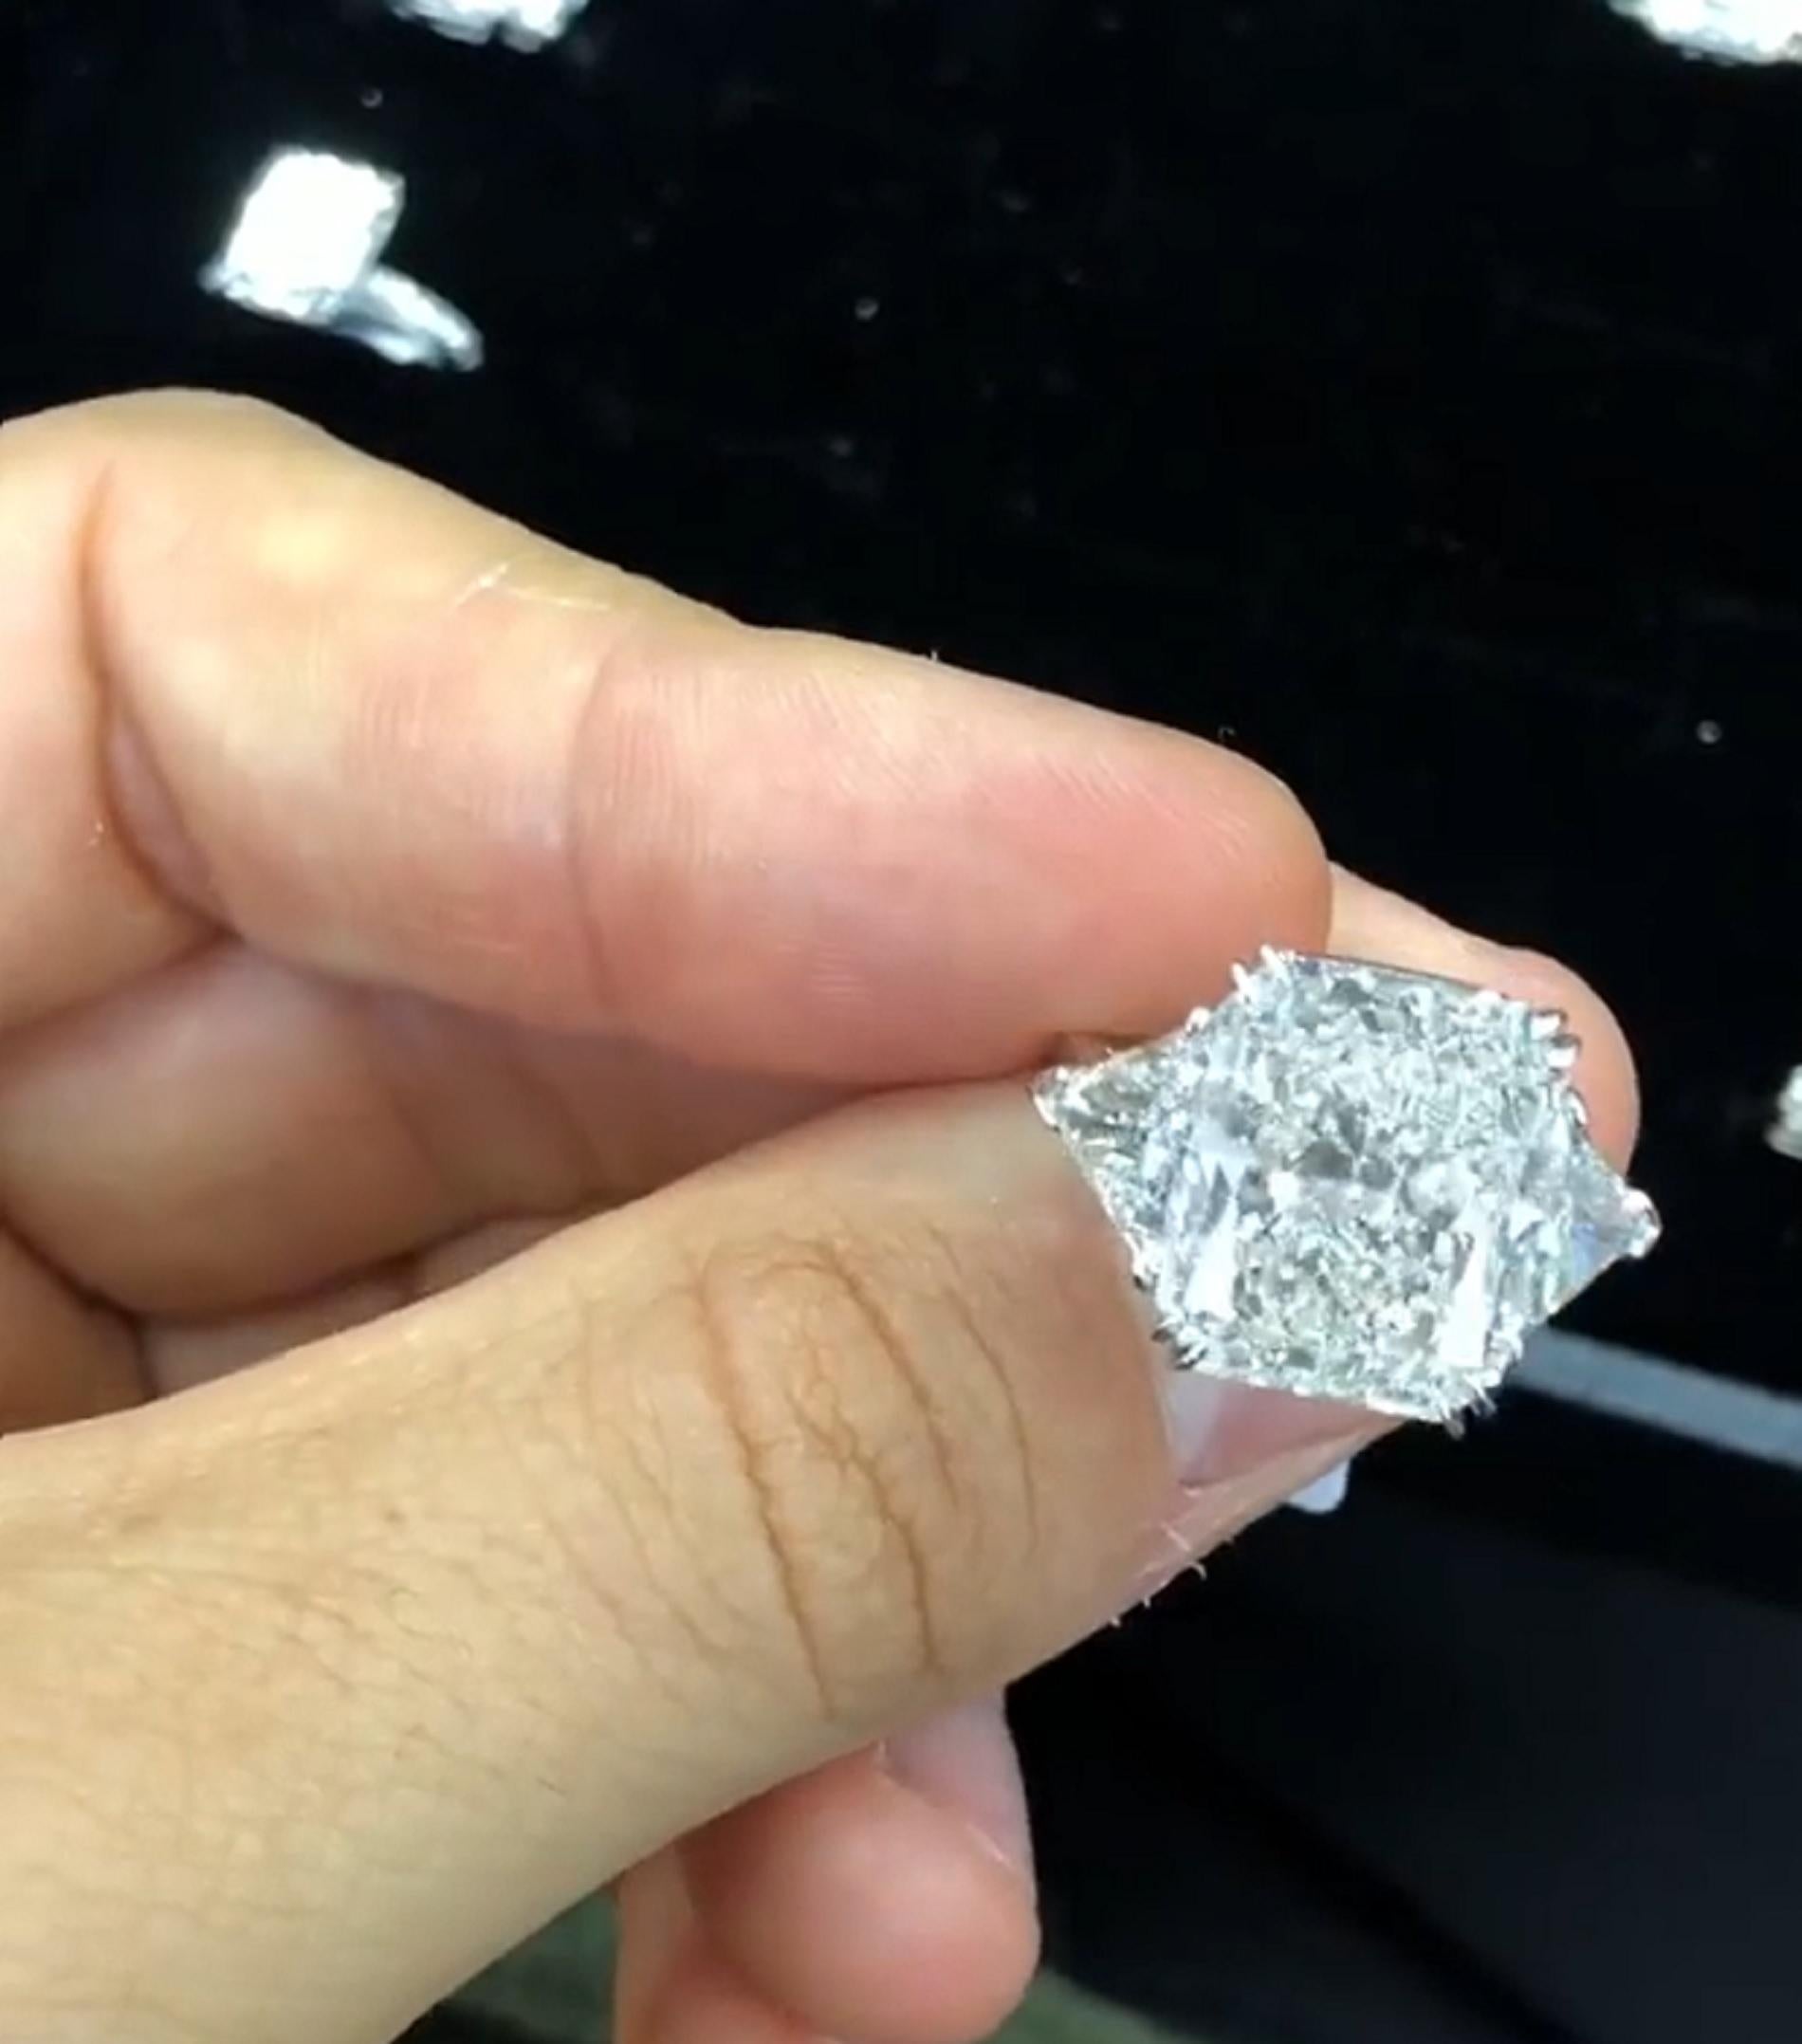 An exquisite GIA certified diamond with VVS1 clarity, g color 
excellent polish
excellent symmetry 
none fluorescence

